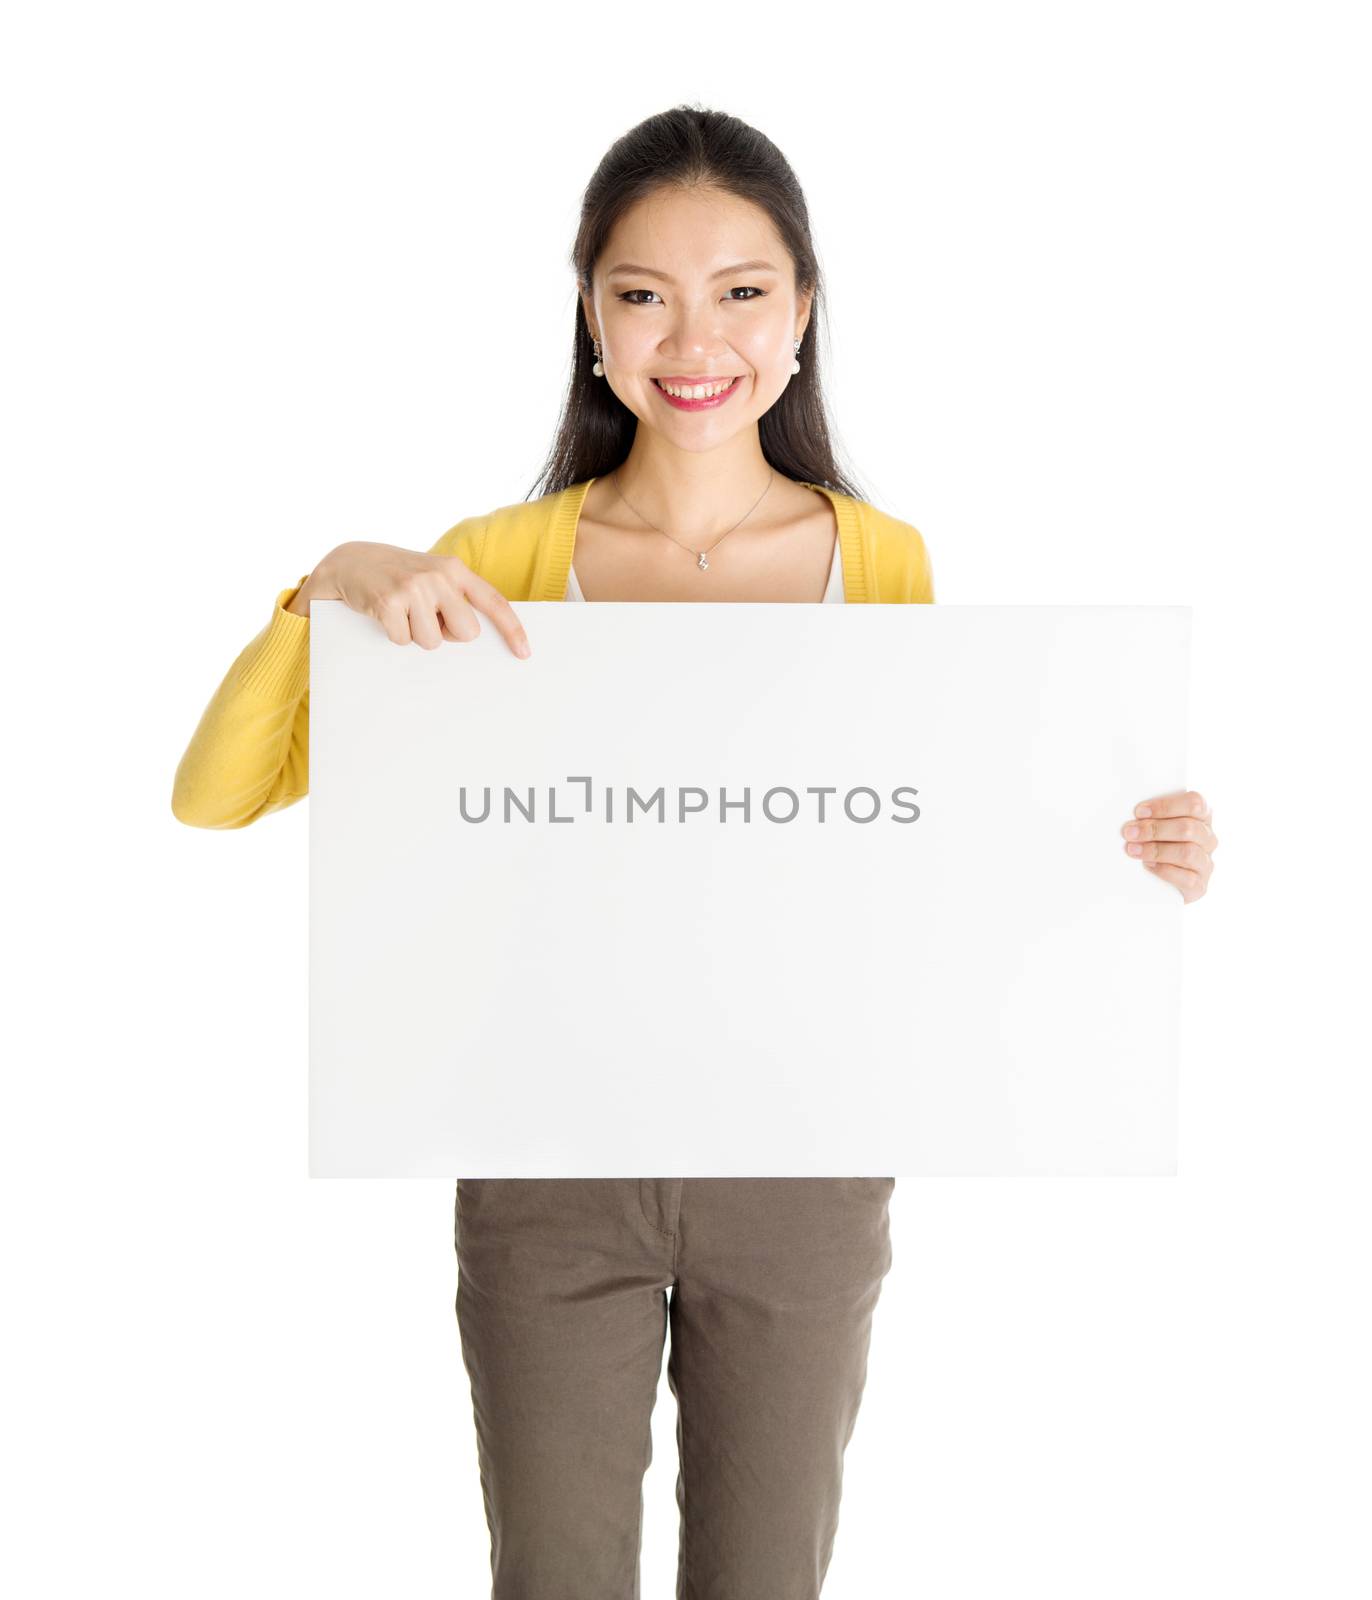 Portrait of casual Asian female hand holding blank white paper card and pointing on it, isolated on white background.